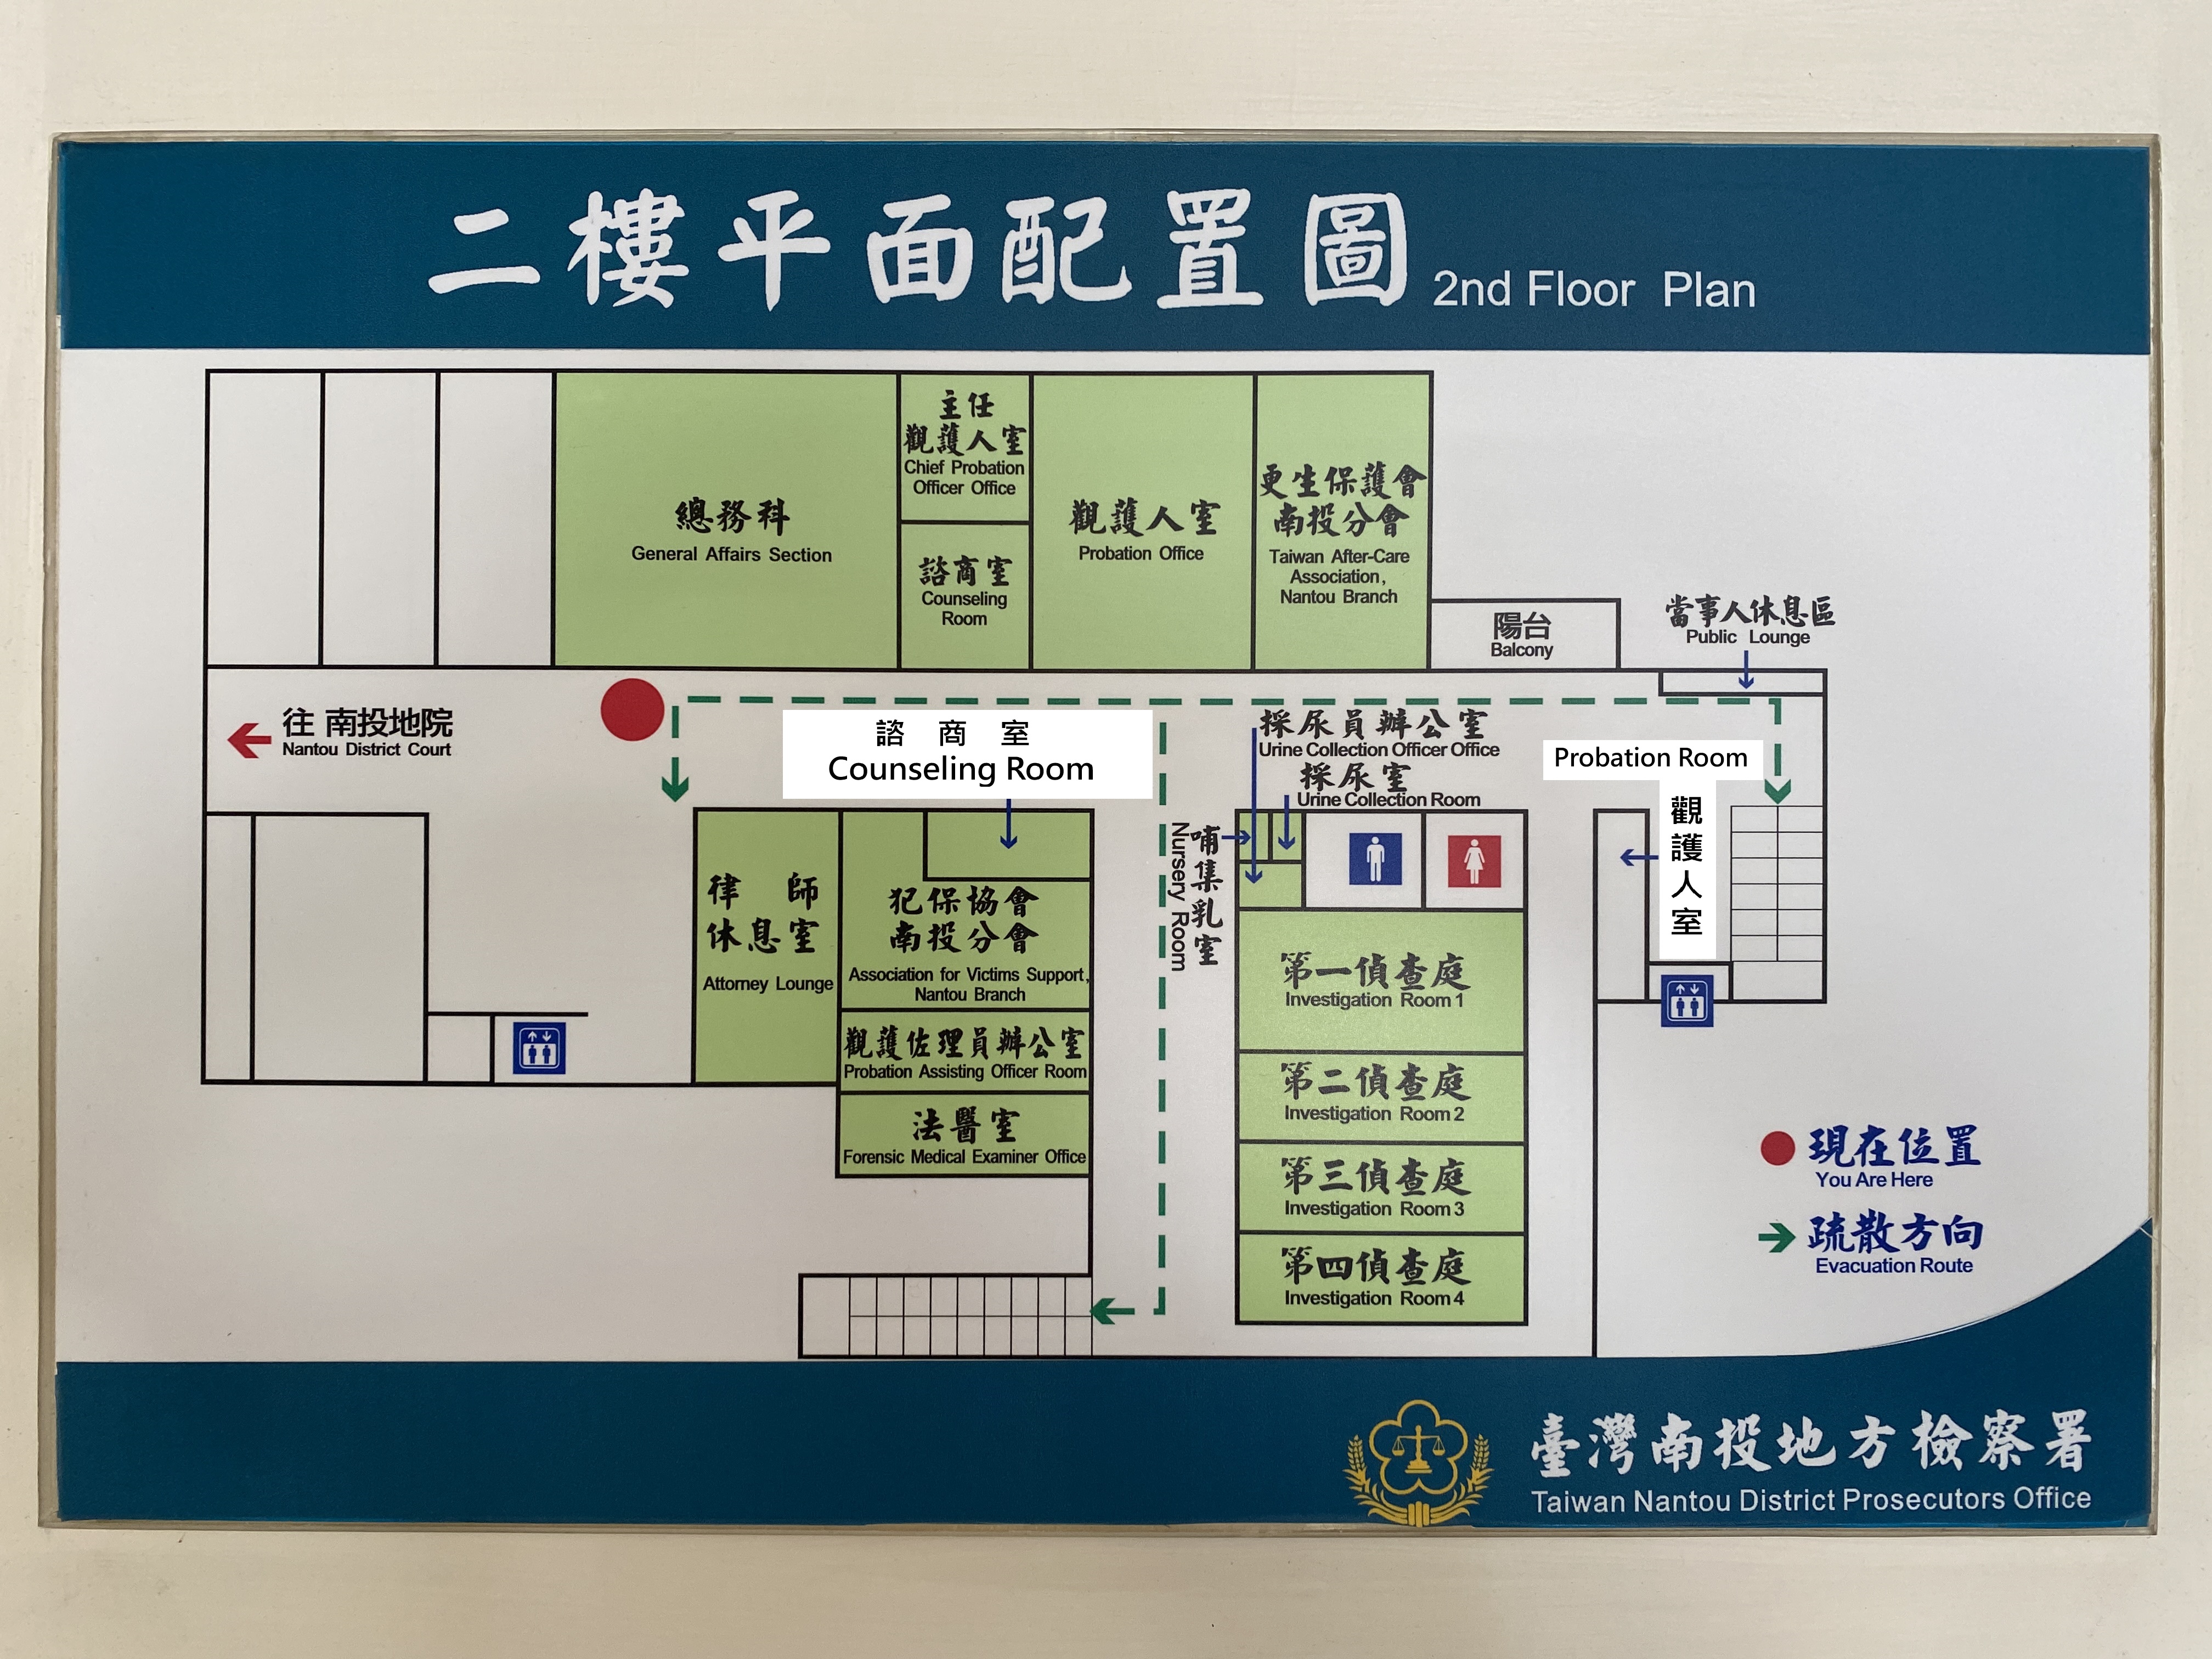 2nd Floor Plan Introduction